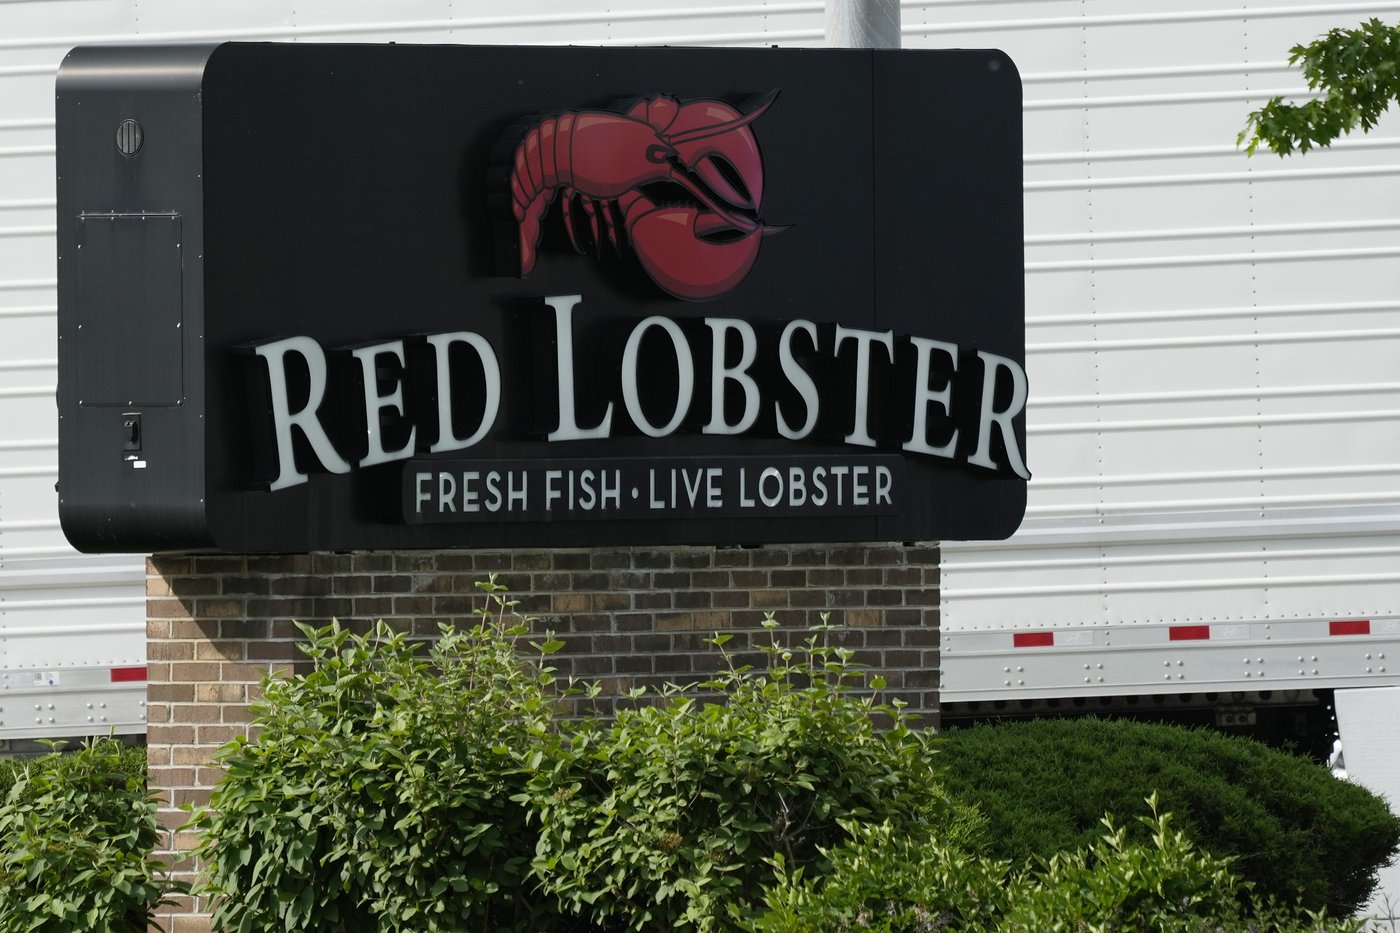 Red Lobster in Ontario court to discuss U.S. bankruptcy case, Canadian